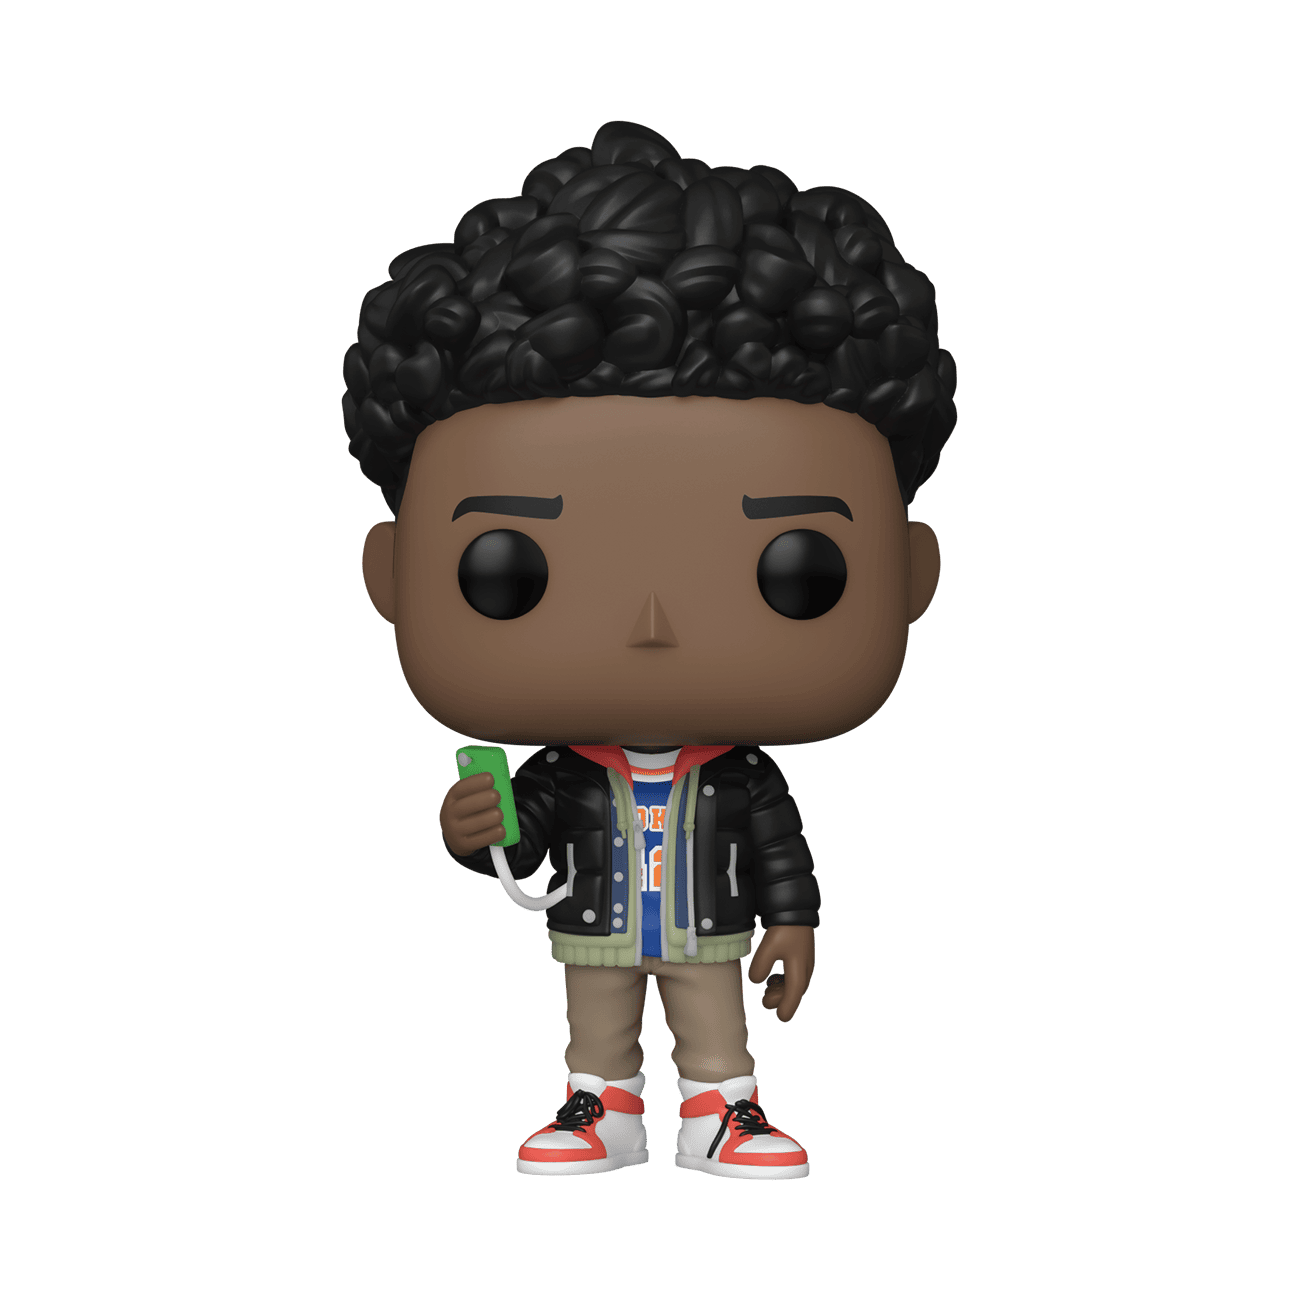 The Target exclusive Pop! Miles Morales from Spider-Man: Across the Spider-Verse.